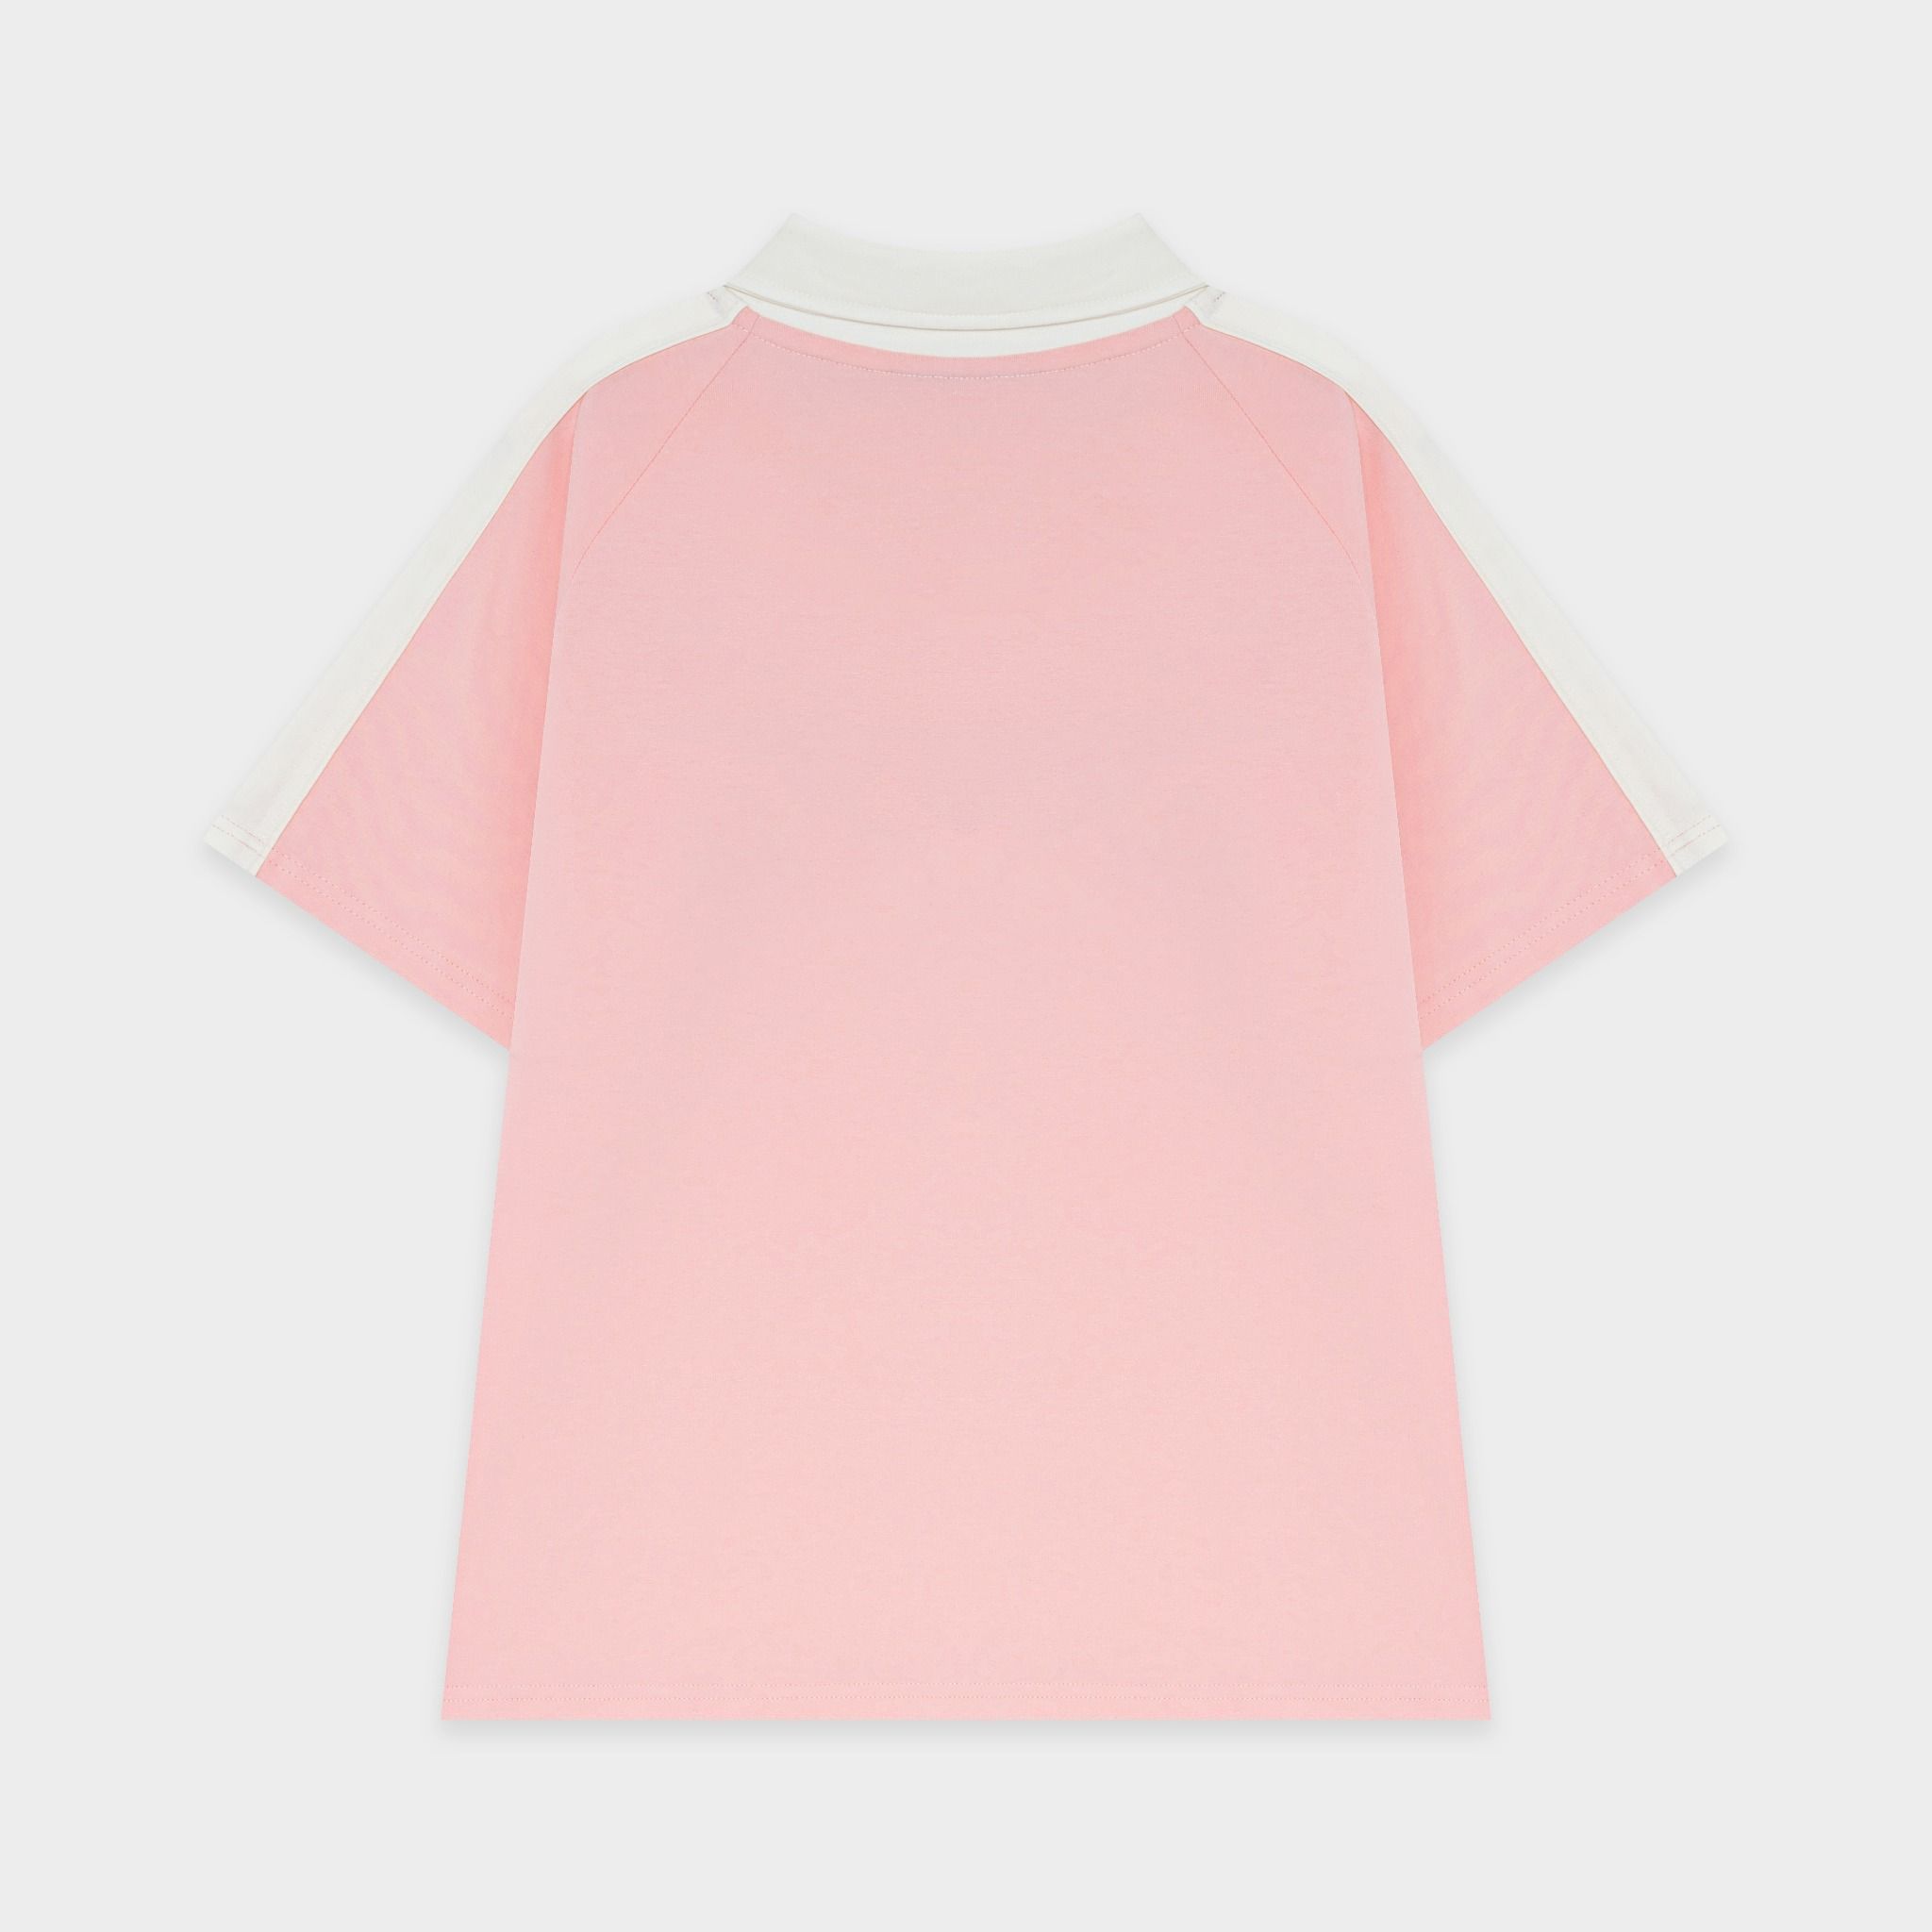  Polo Outerity Five Star / Pastel Pink 